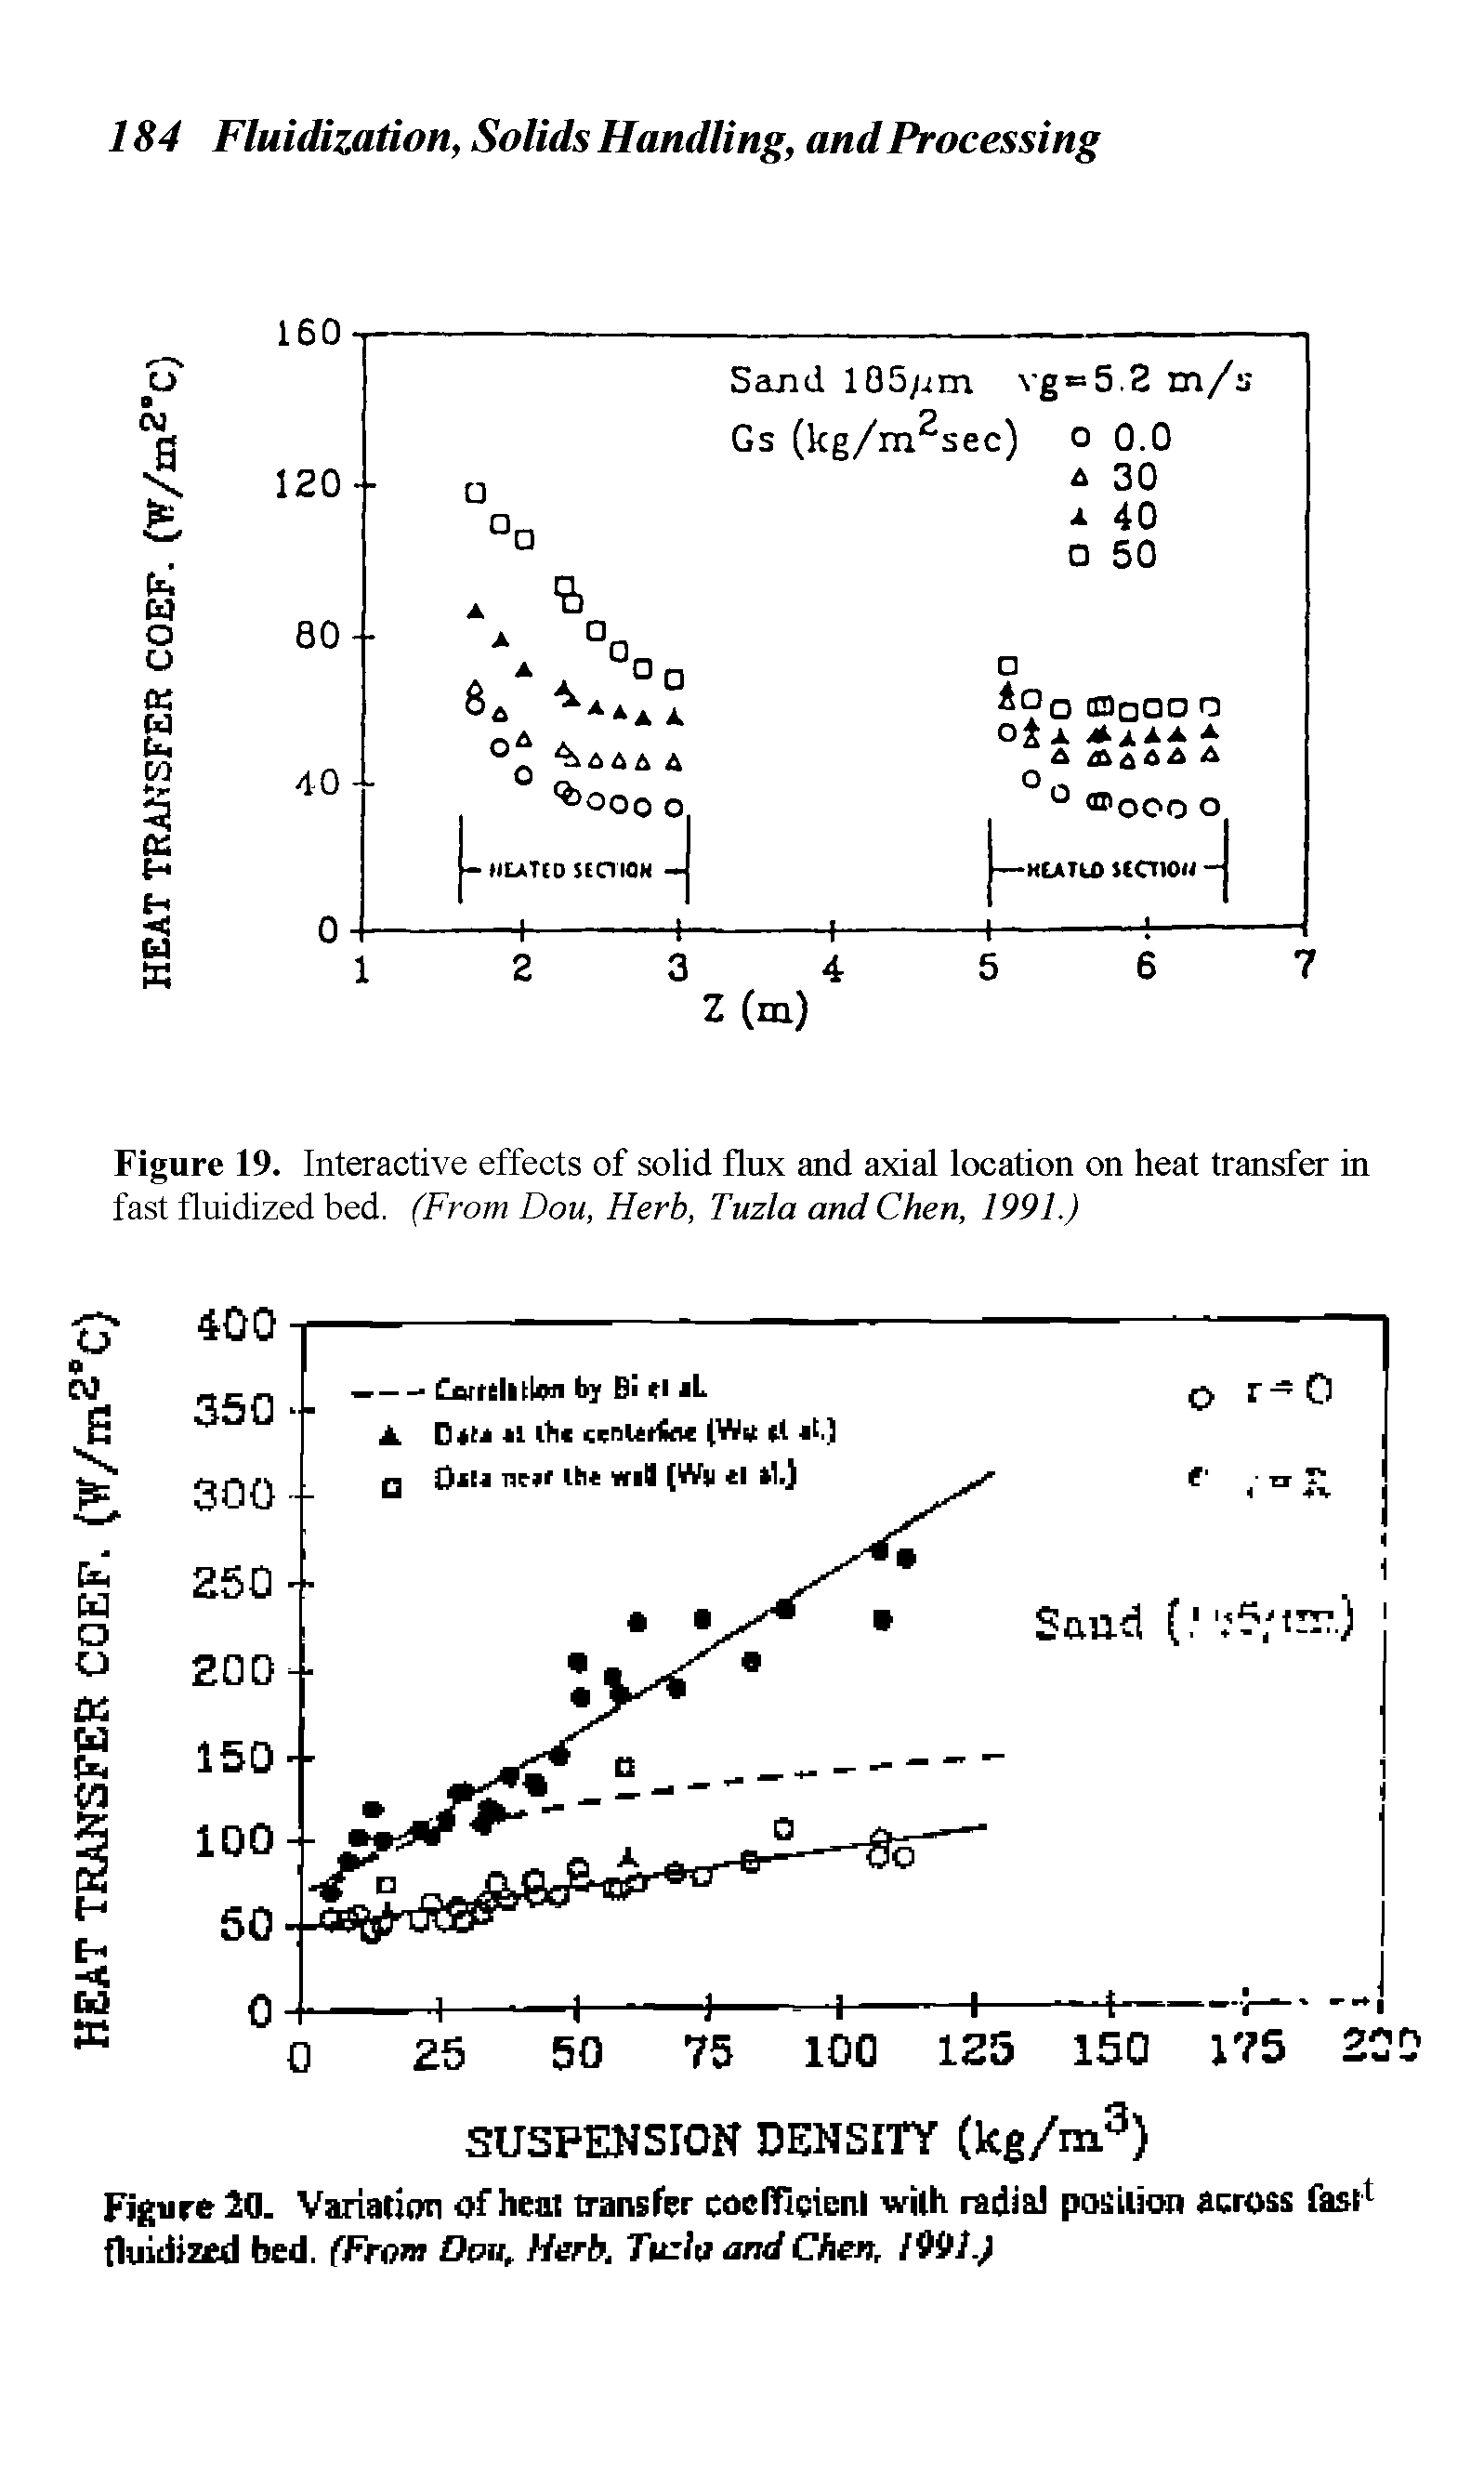 Figure 20. Variation of heat transfer coefficient with radial position across fast1 fluidized bed. (From Dun, Herb. Turin and Chen, 1991. ...